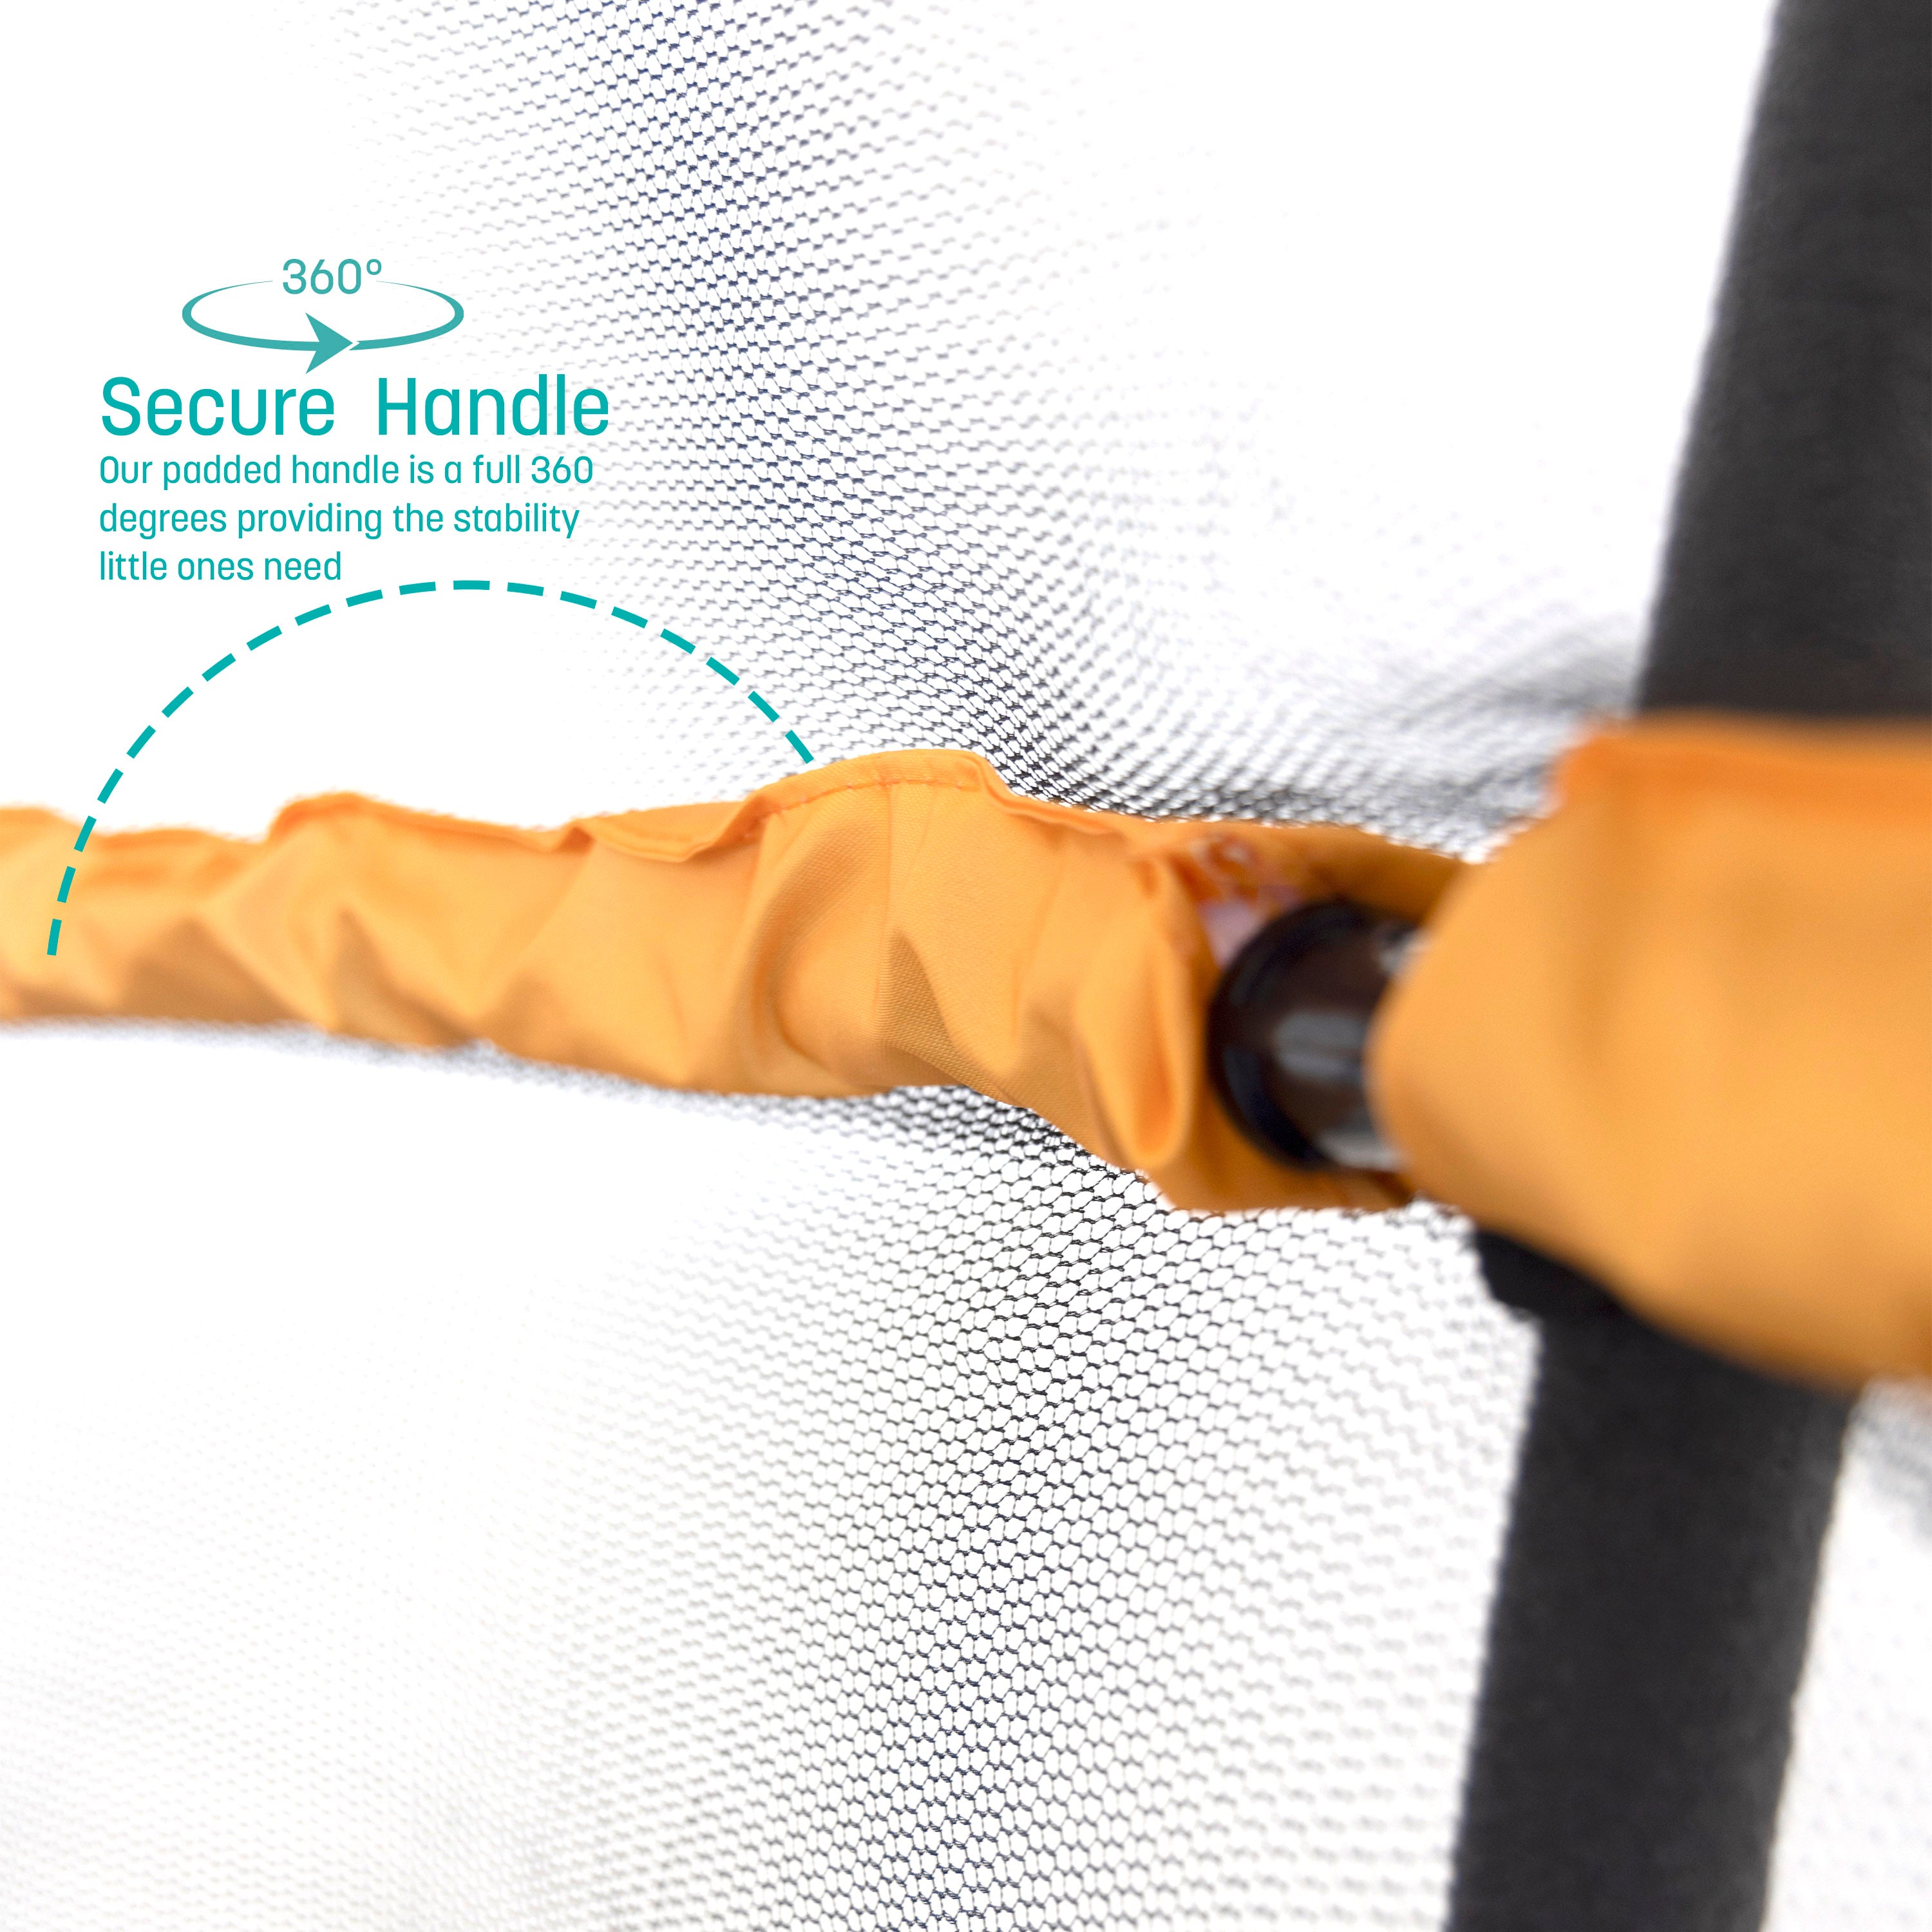 A close-up view of the yellow handlebar. A teal callout feature states, “Secure Handle: Our padded handle is a full 360 degrees providing the stability little ones need”.